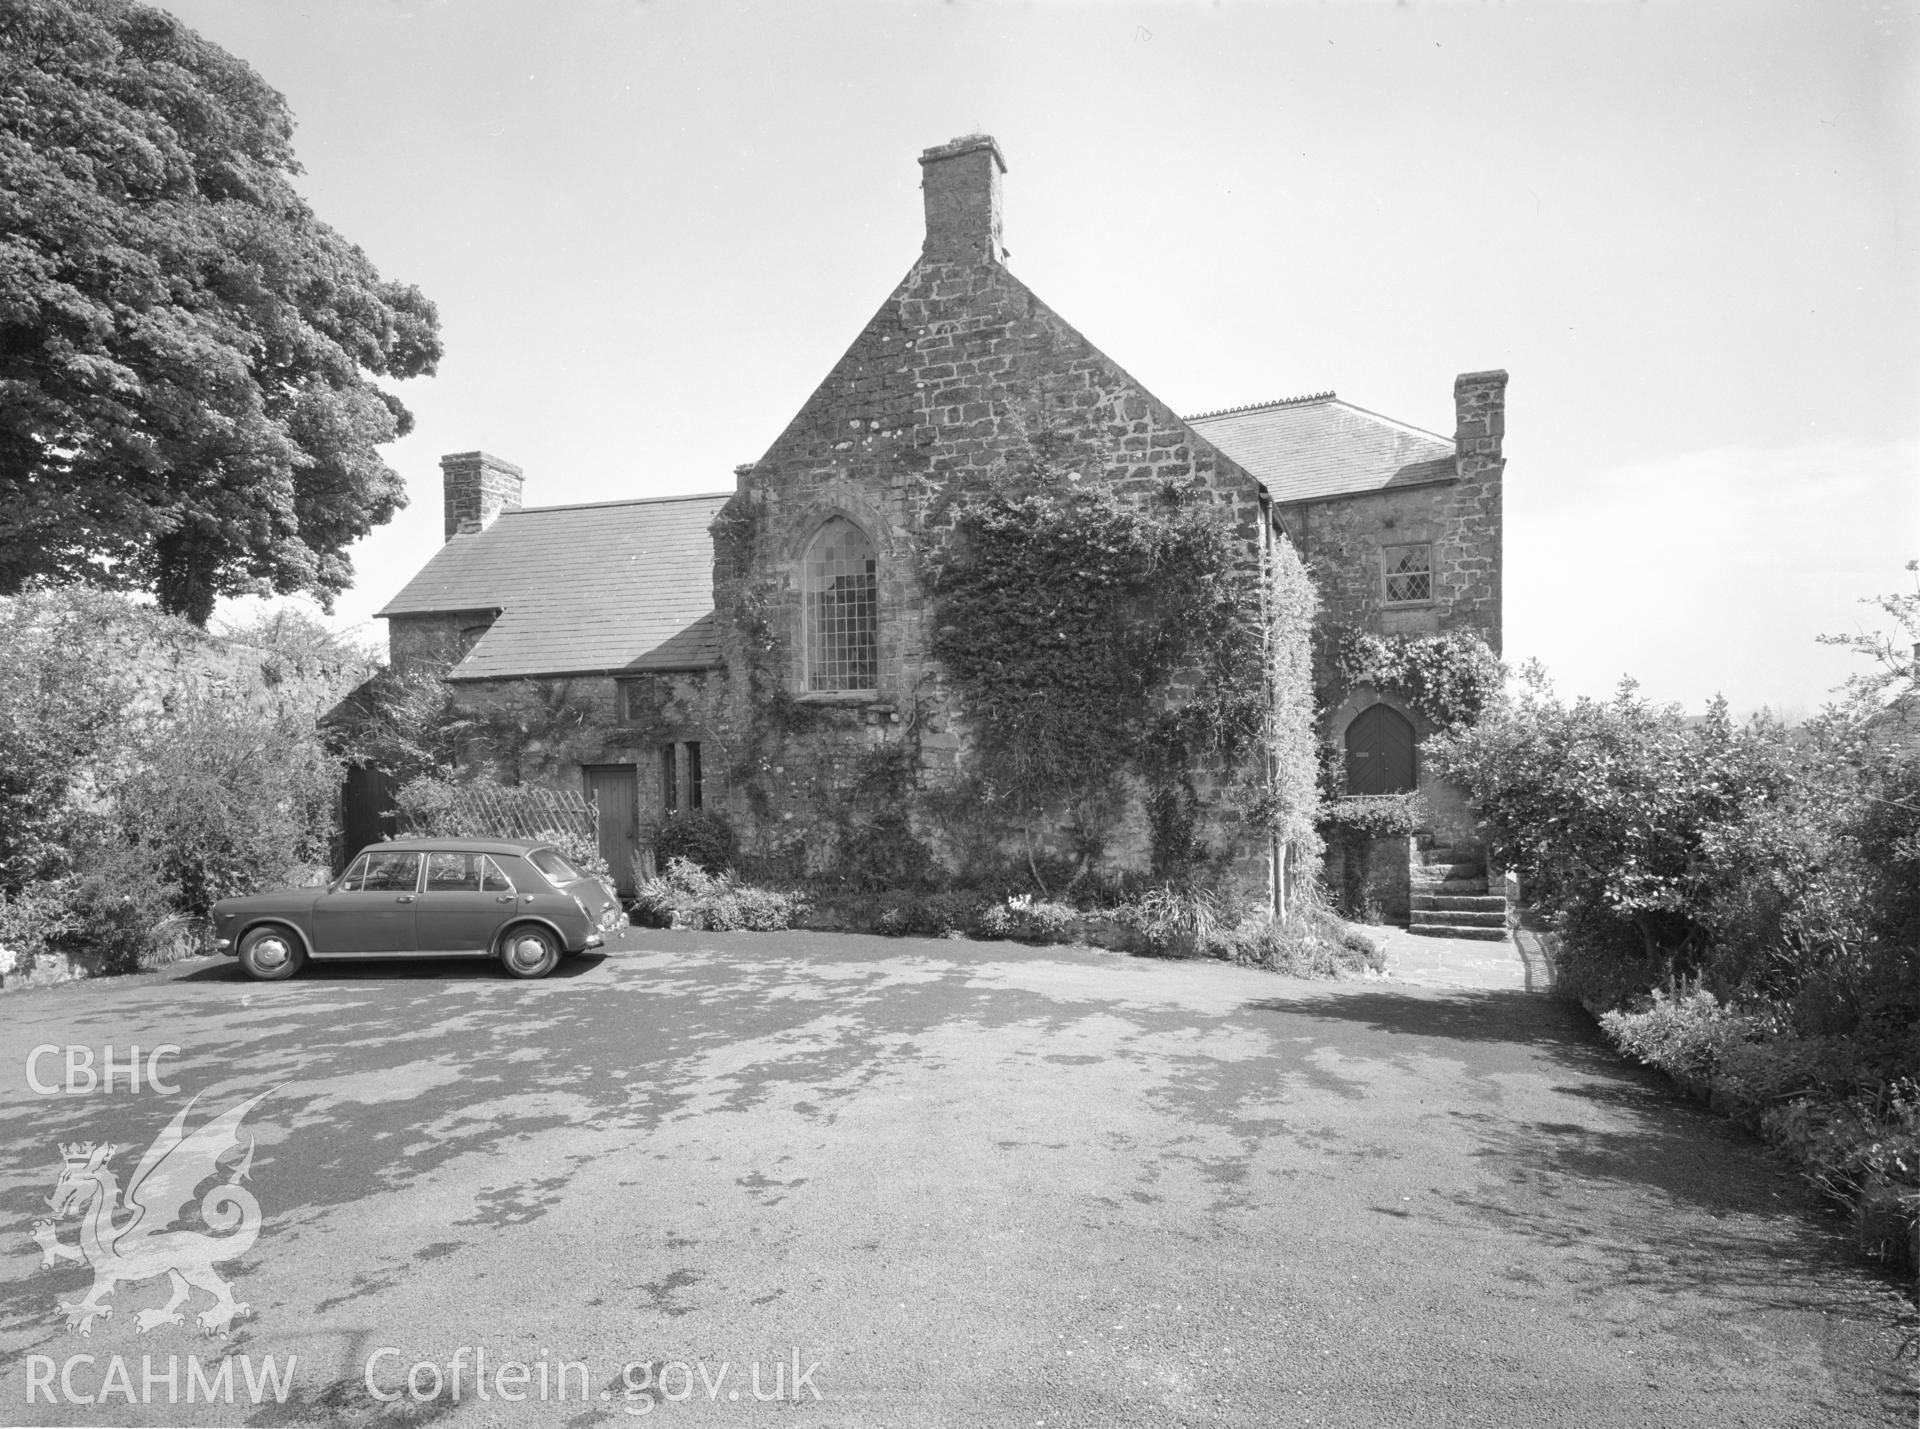 Black and white acetate negative showing view of Monkston Hall.